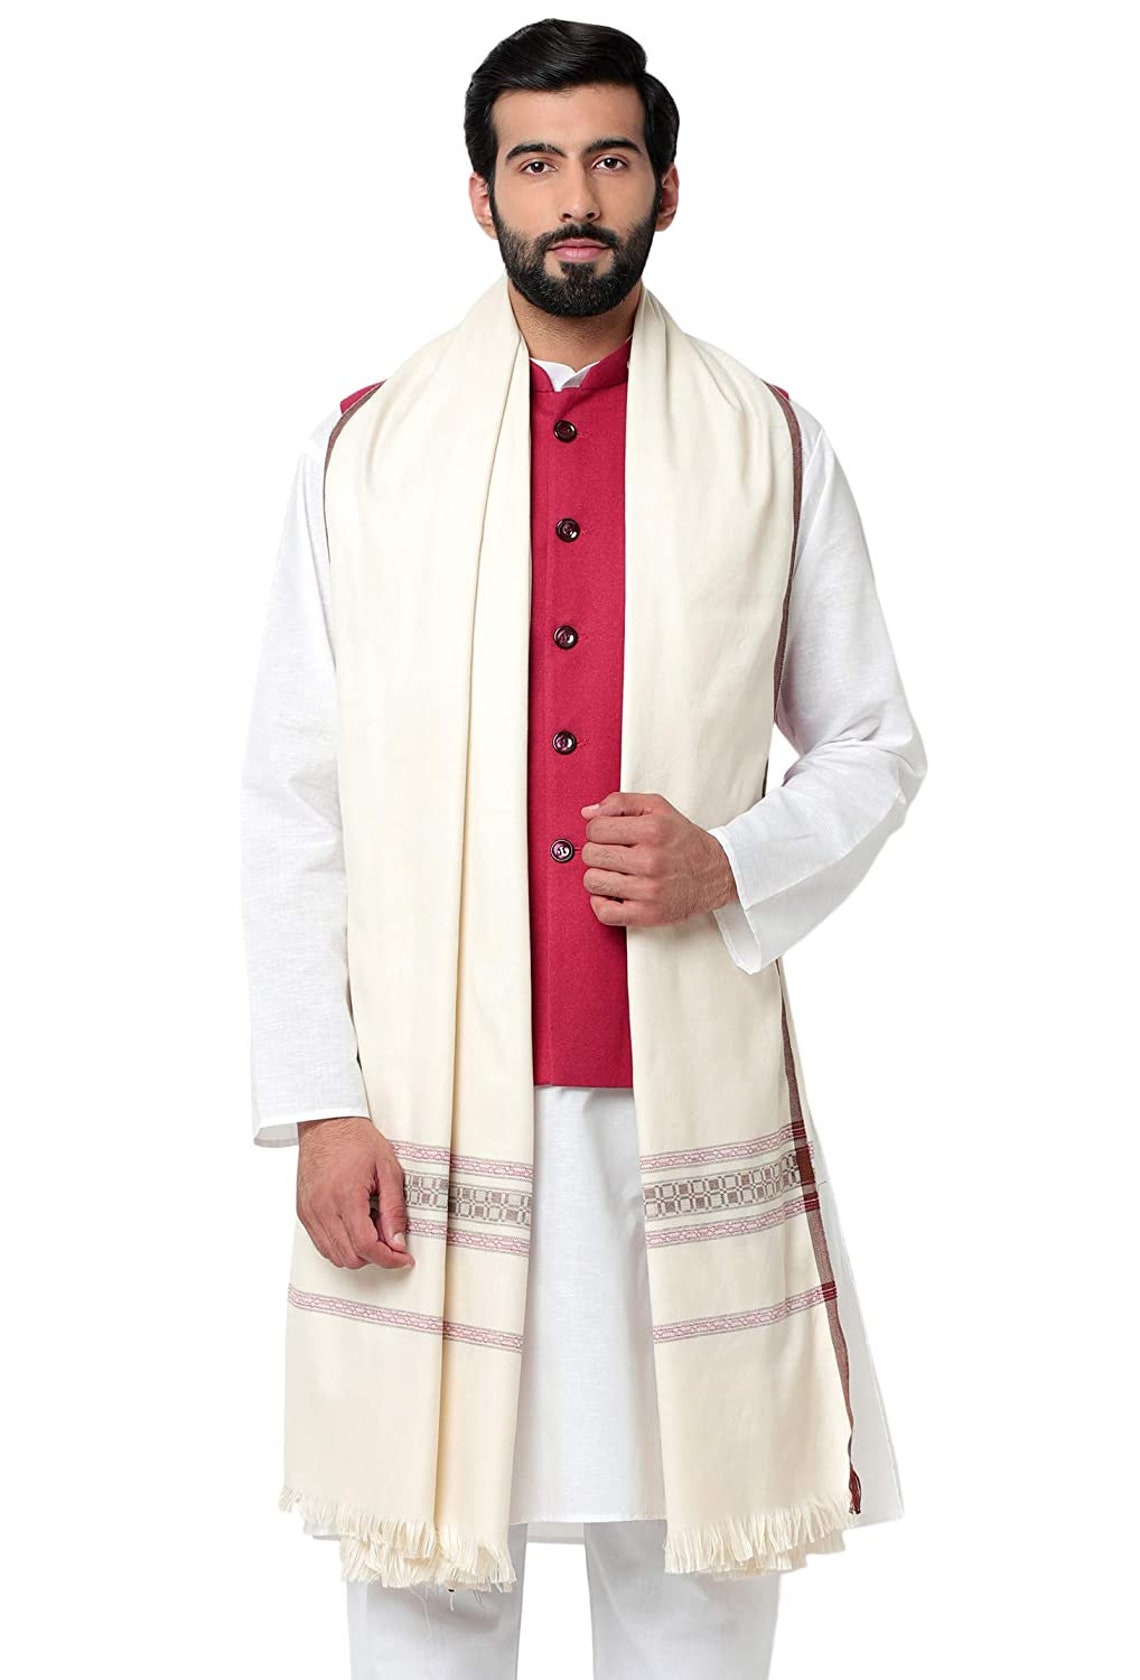 Wool Dupatta Stole for Men- Beige Indian Clothing in Denver, CO, Aurora, CO, Boulder, CO, Fort Collins, CO, Colorado Springs, CO, Parker, CO, Highlands Ranch, CO, Cherry Creek, CO, Centennial, CO, and Longmont, CO. NATIONWIDE SHIPPING USA- India Fashion X